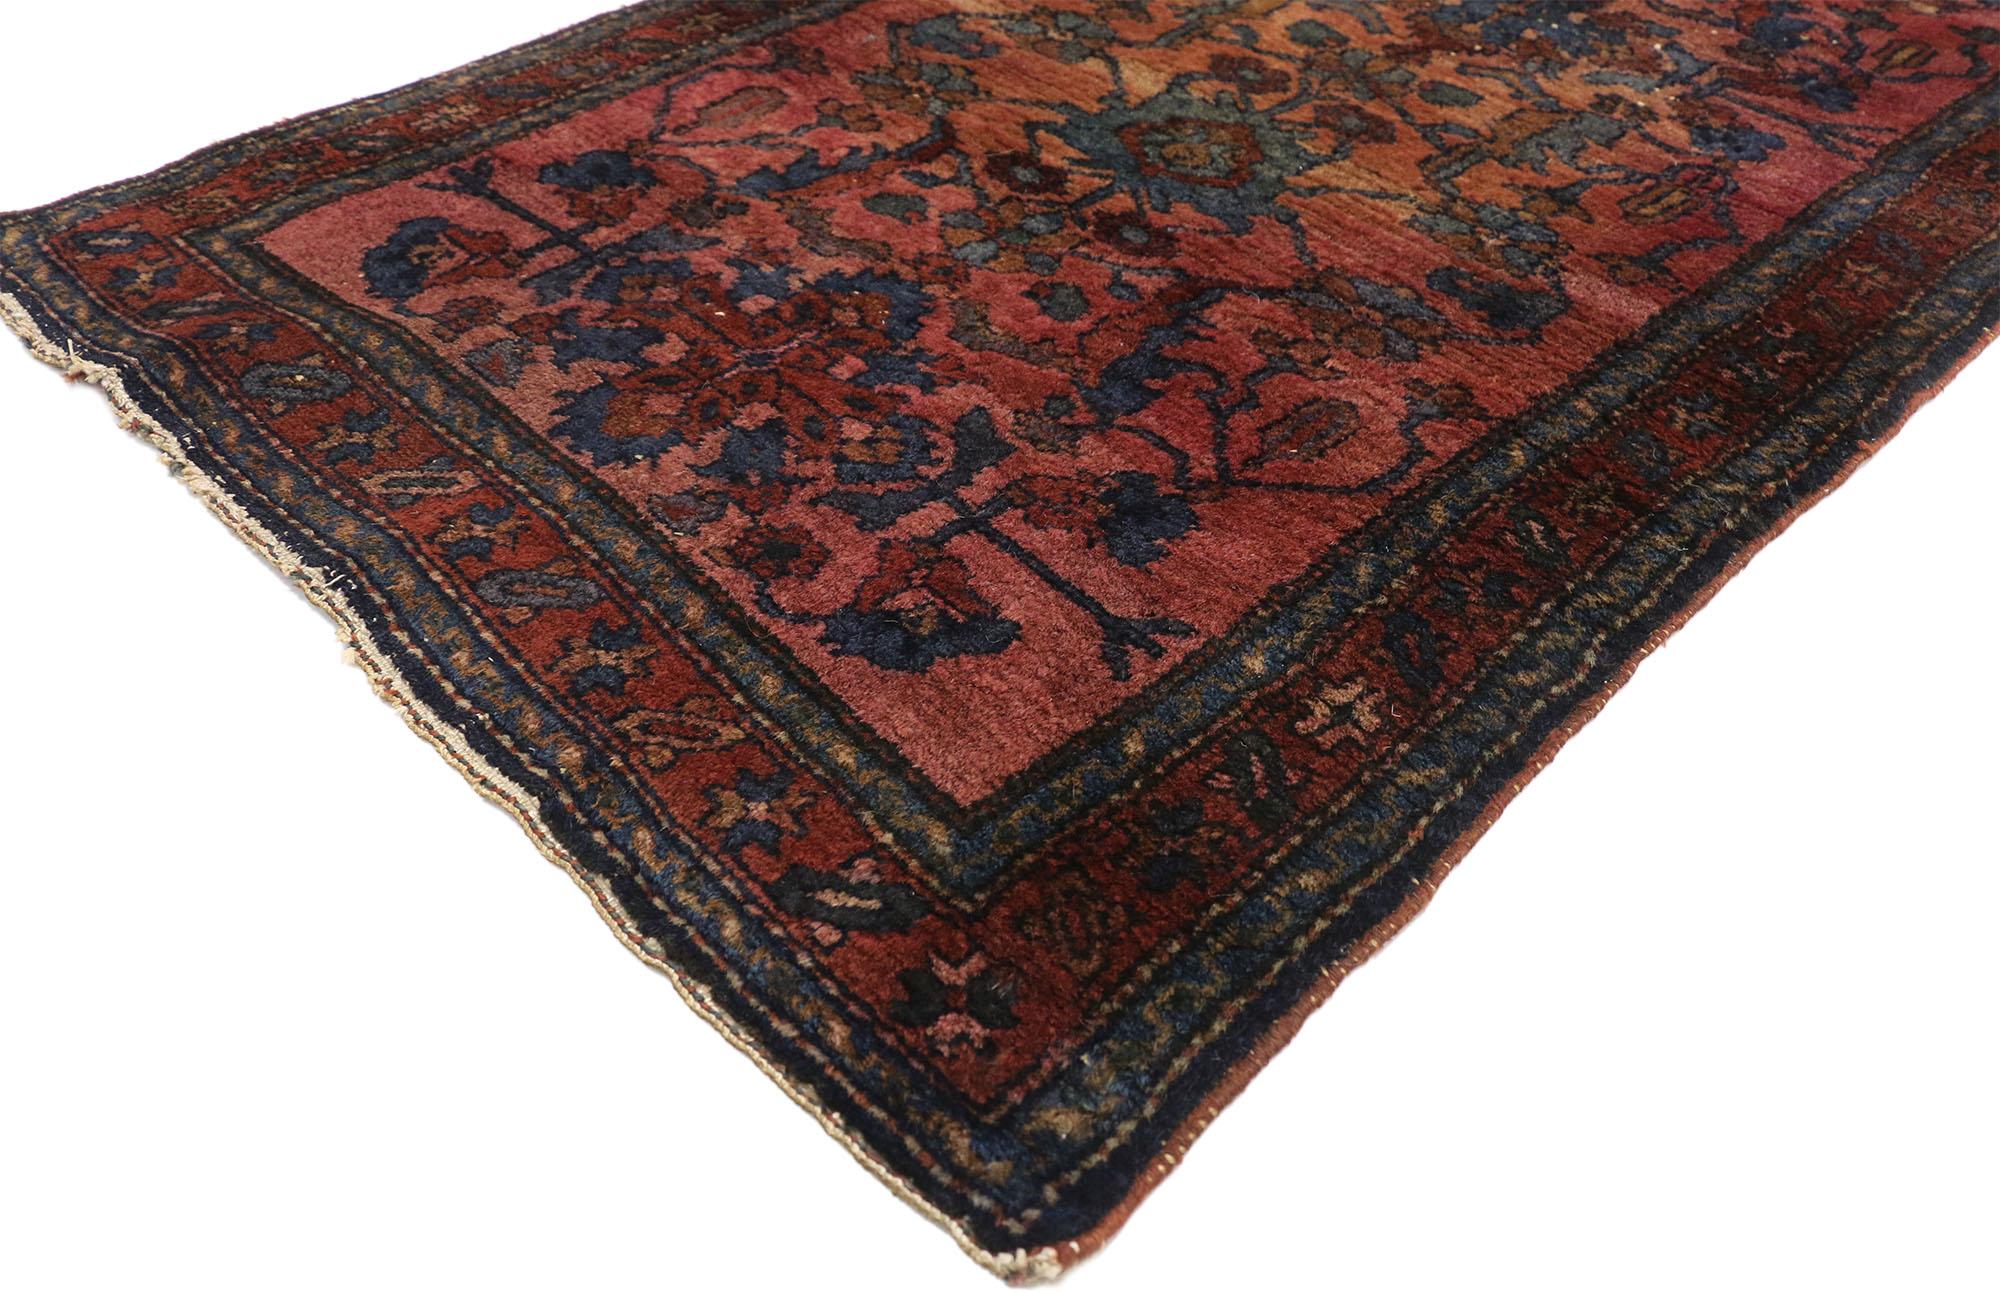 77236 Antique Persian Lilihan Long Hallway Runner with Bohemian Regency Style 02'08 x 16'03. This hand-knotted wool antique Persian Lilihan long hallway runner features a Herati pattern with a geometric floral design on a reddish-dark pink rose